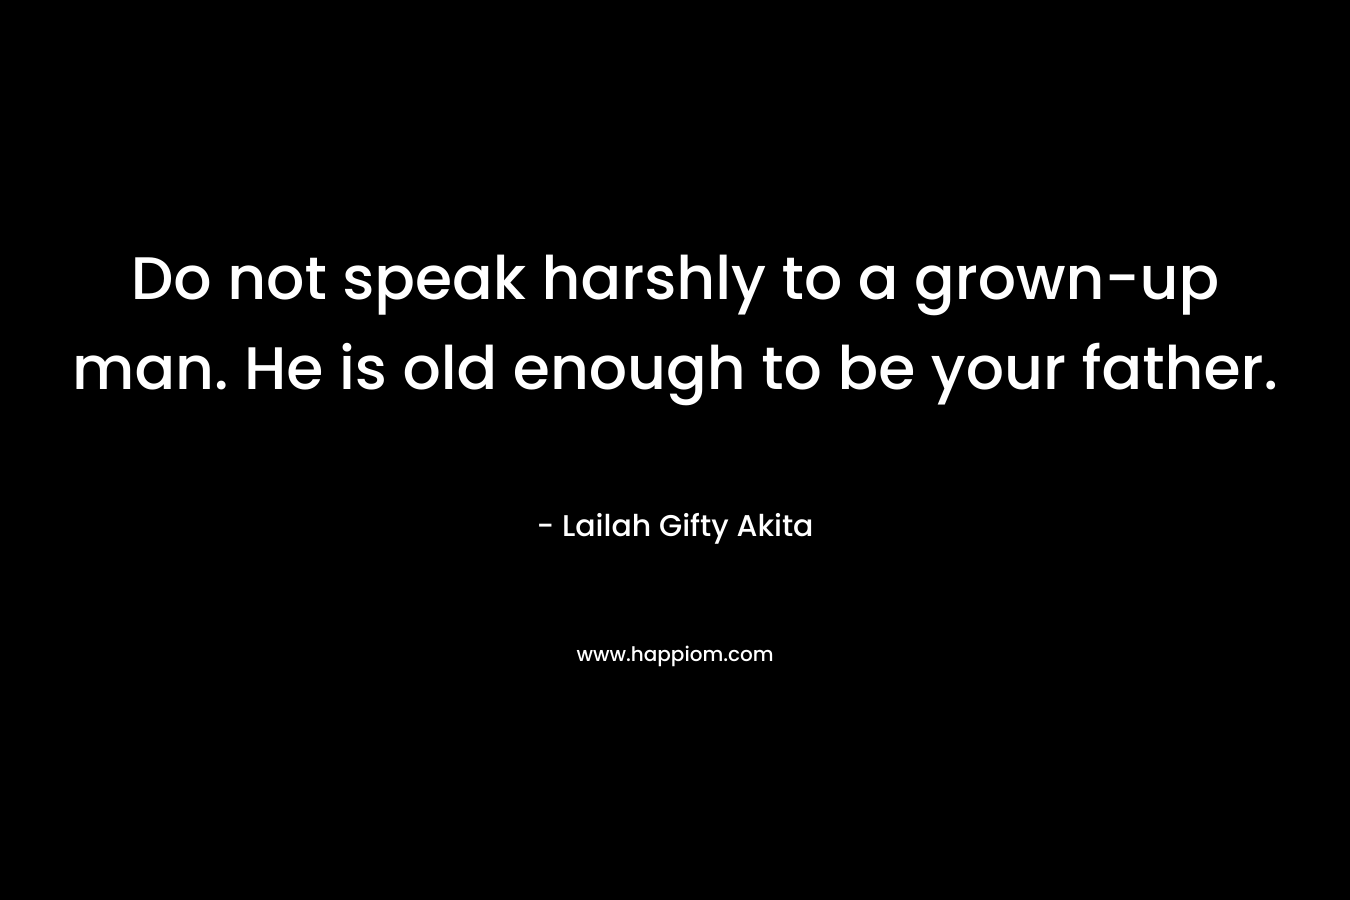 Do not speak harshly to a grown-up man. He is old enough to be your father.